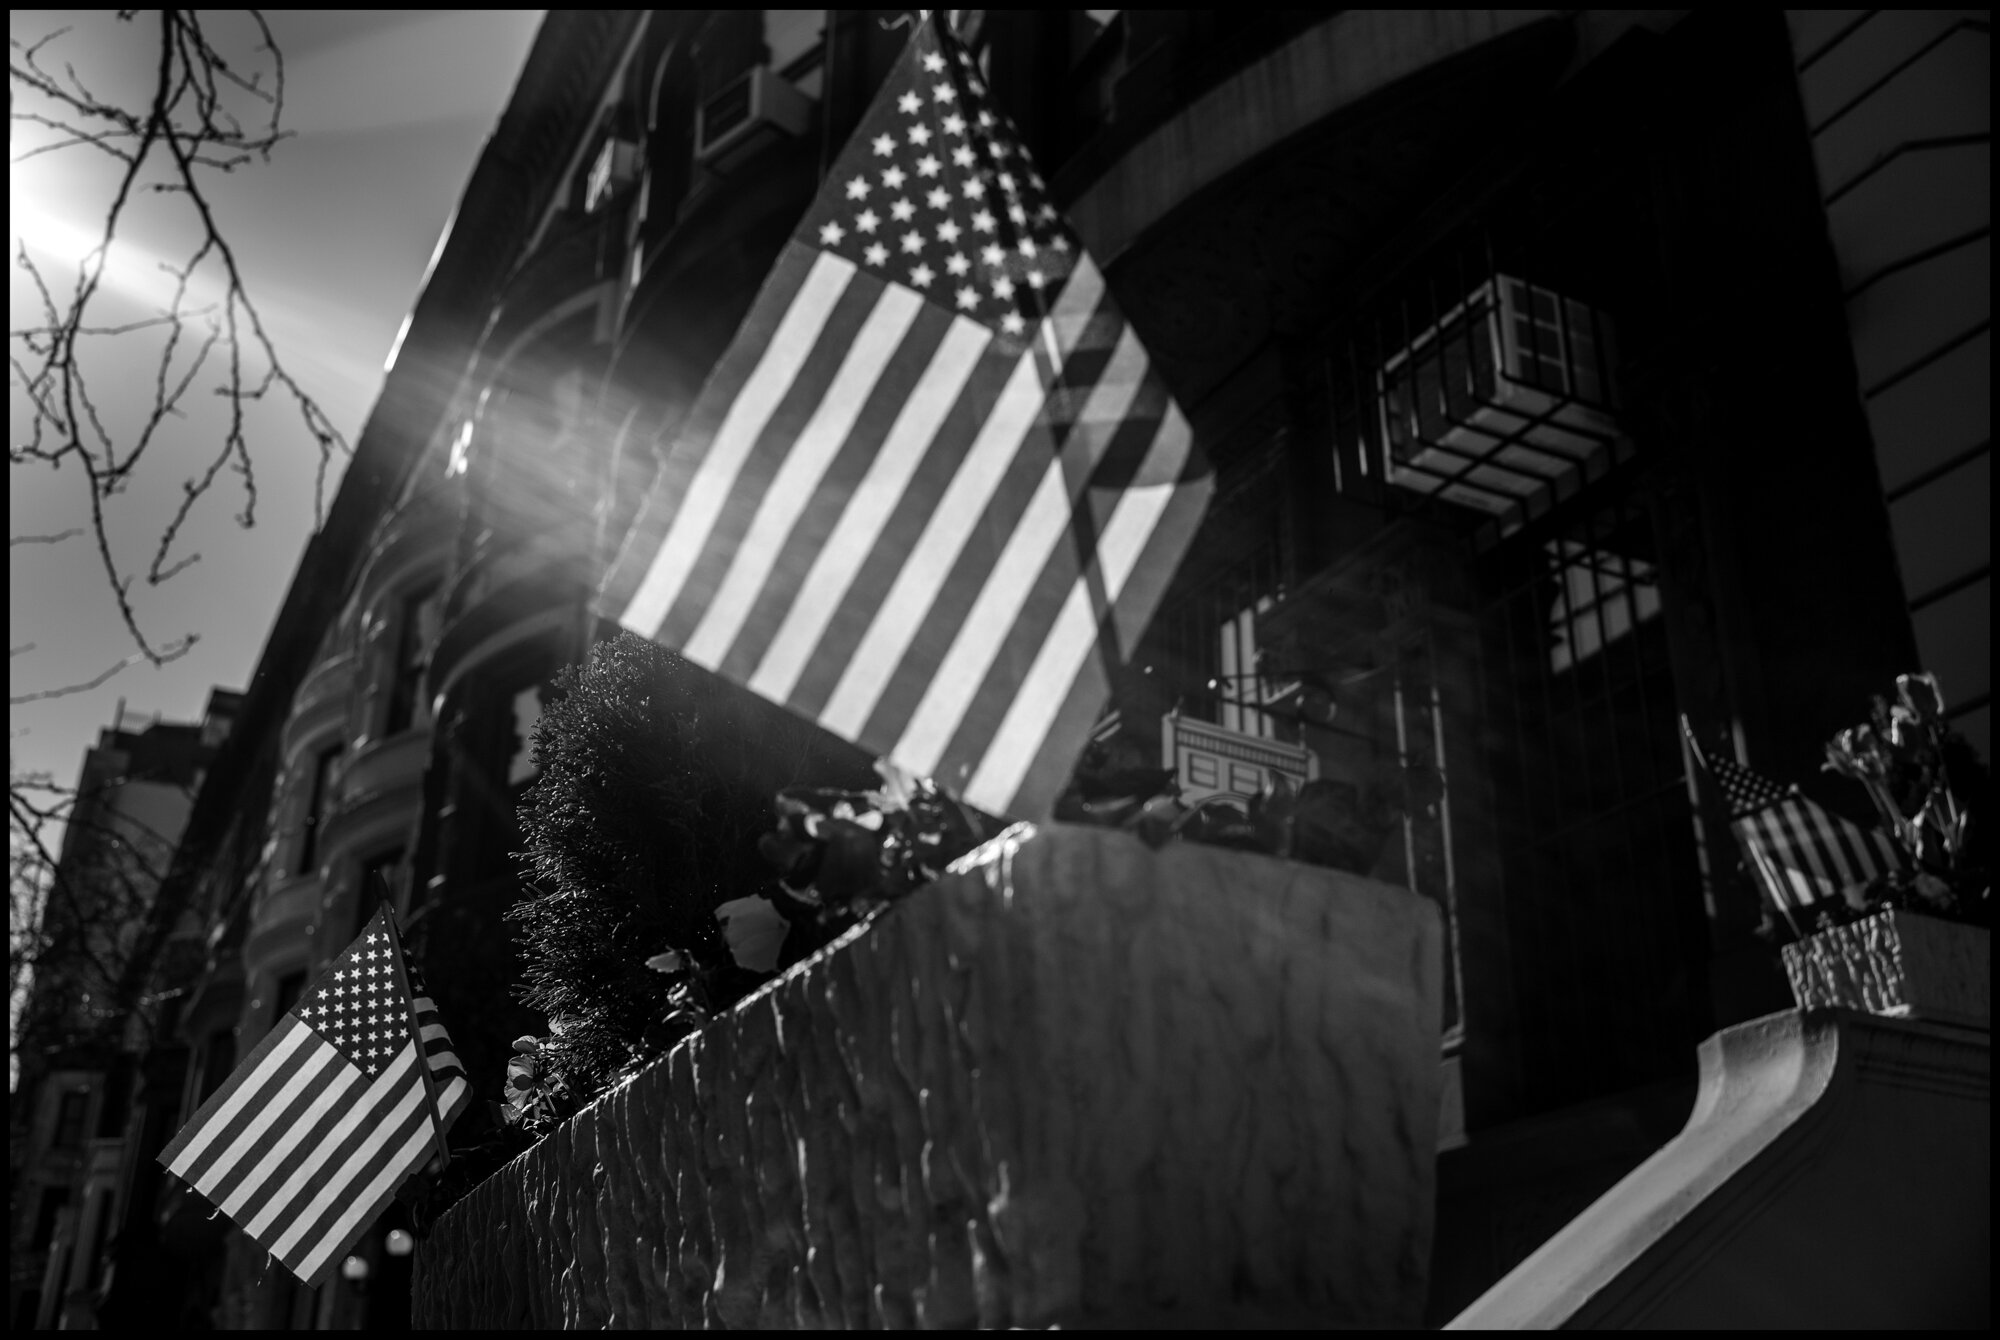  It is a new moment in America and the world-and our lives that will be forever changed-we simply don’t know yet, exactly how.  April 6, 2020. © Peter Turnley  ID#&nbsp;14-015 